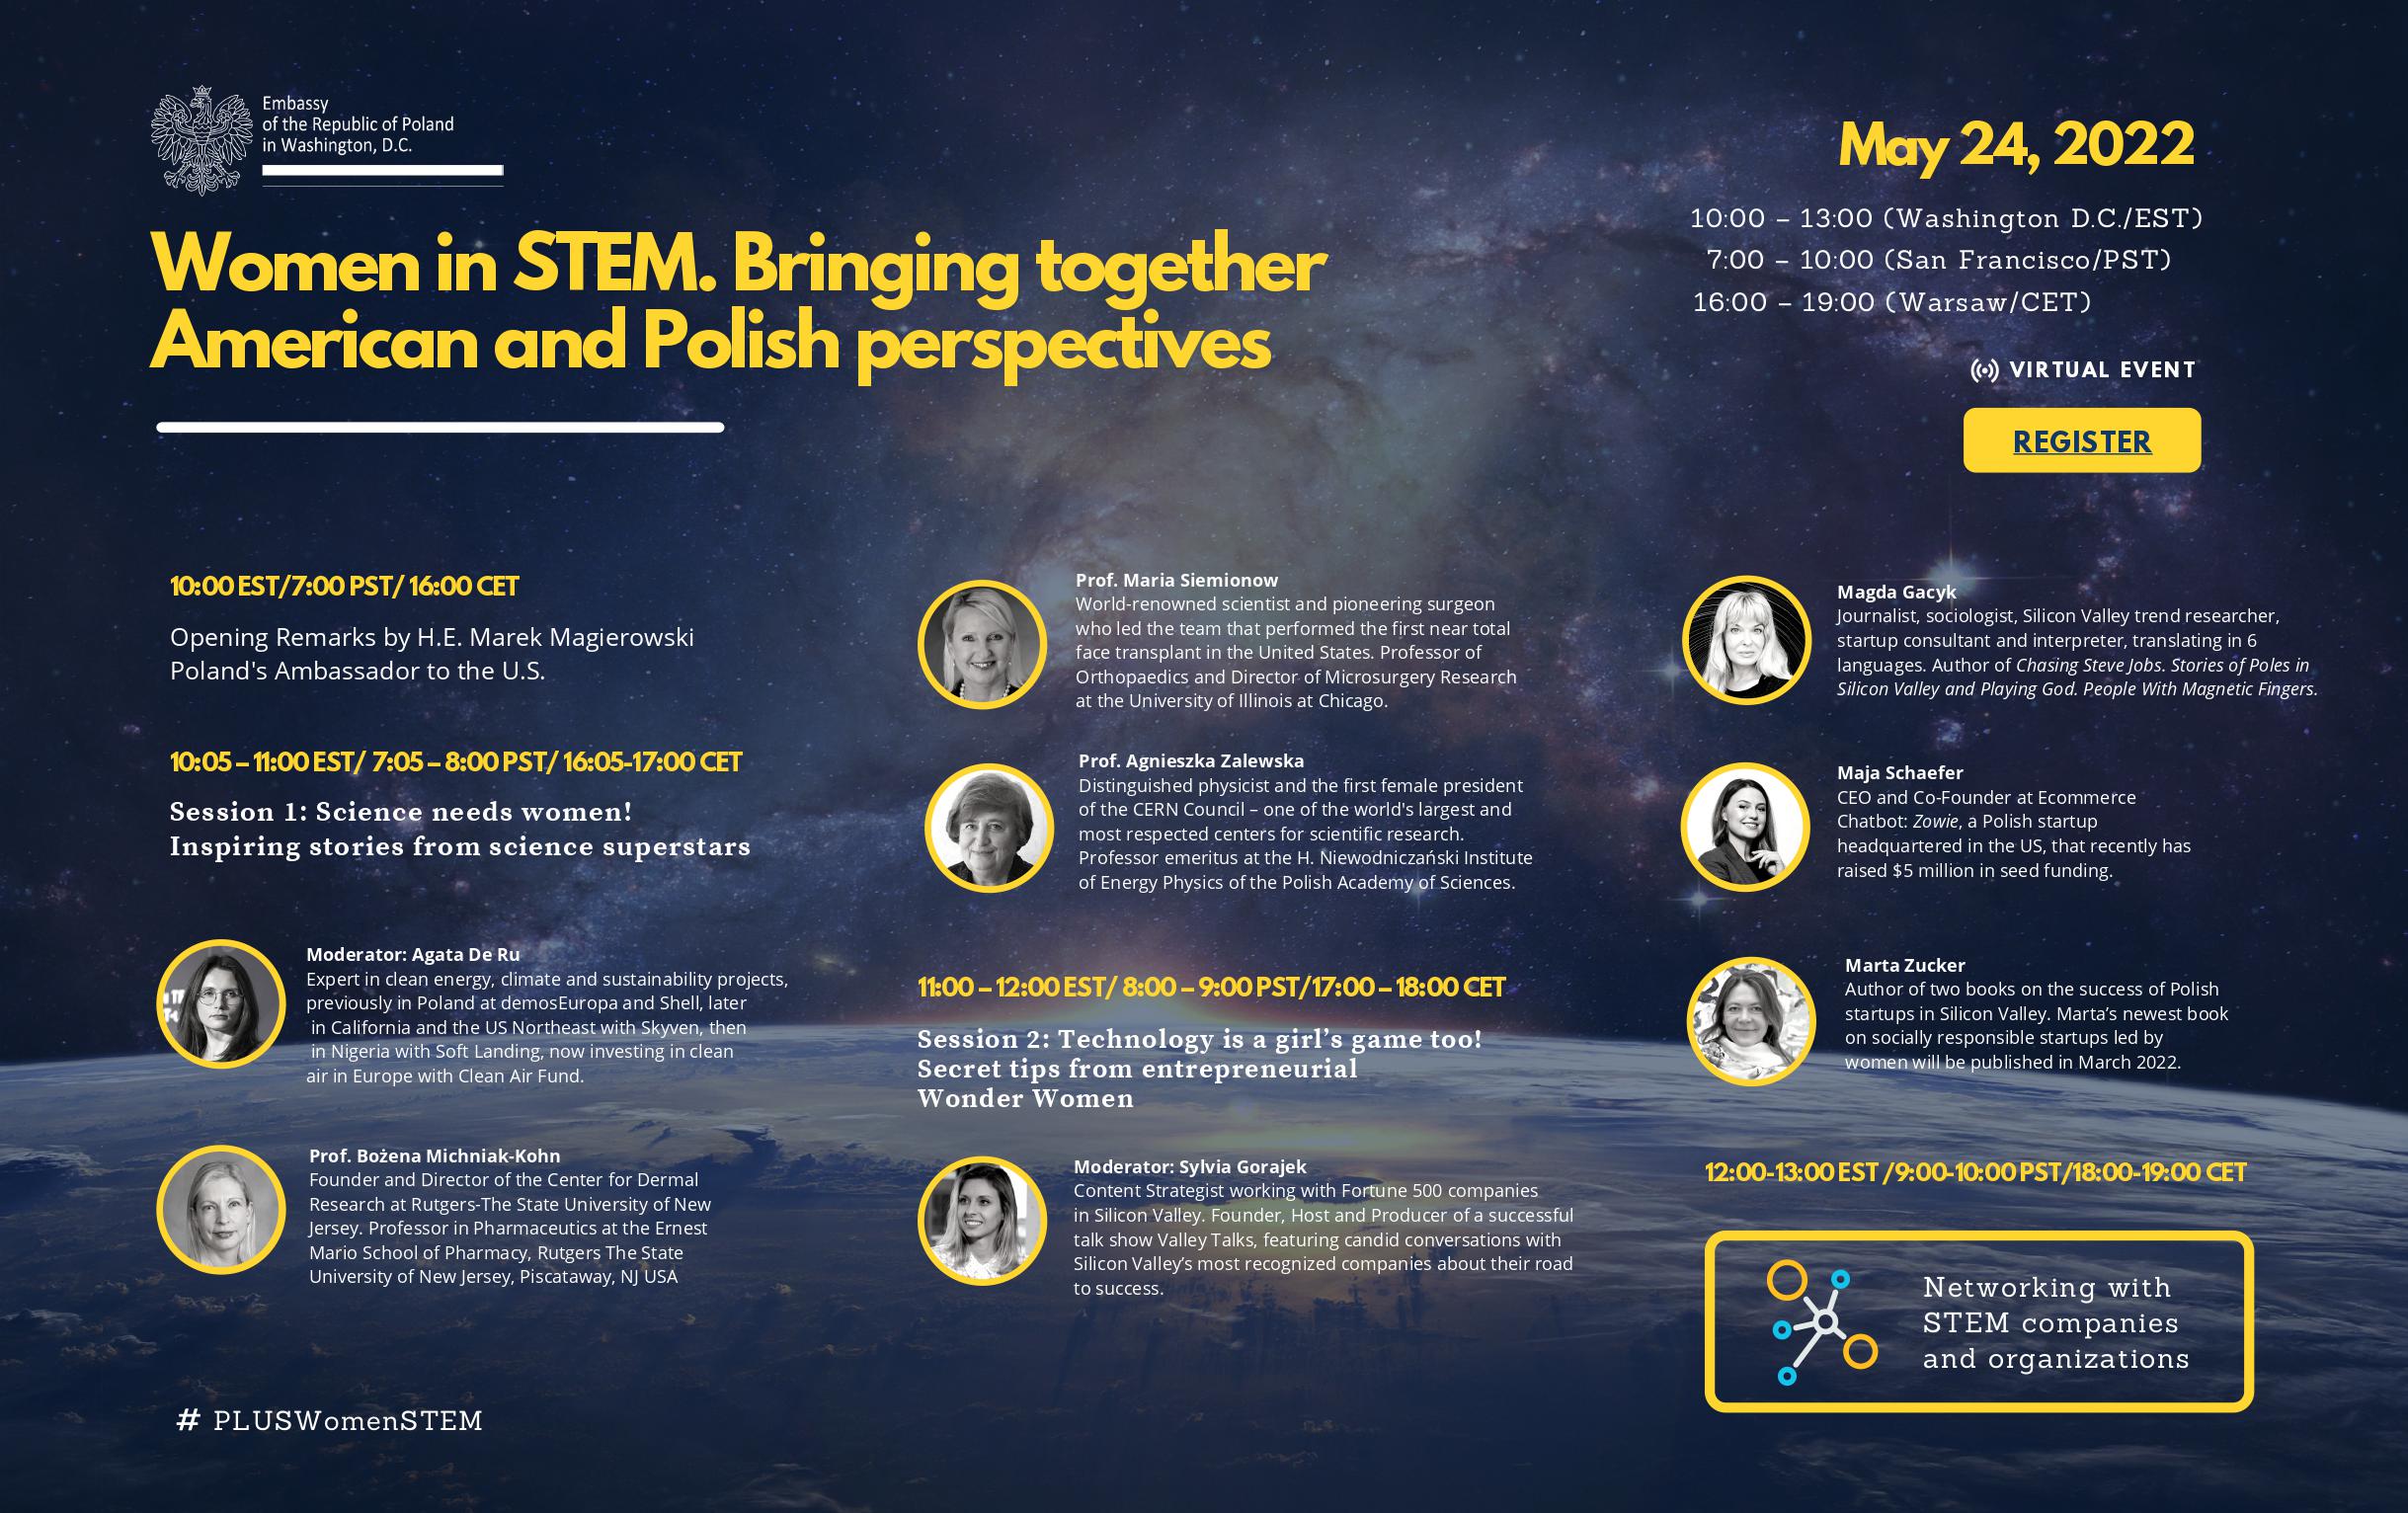 May 24th's “Women in STEM: Bringing together Polish and American perspectives” - Virtual Event